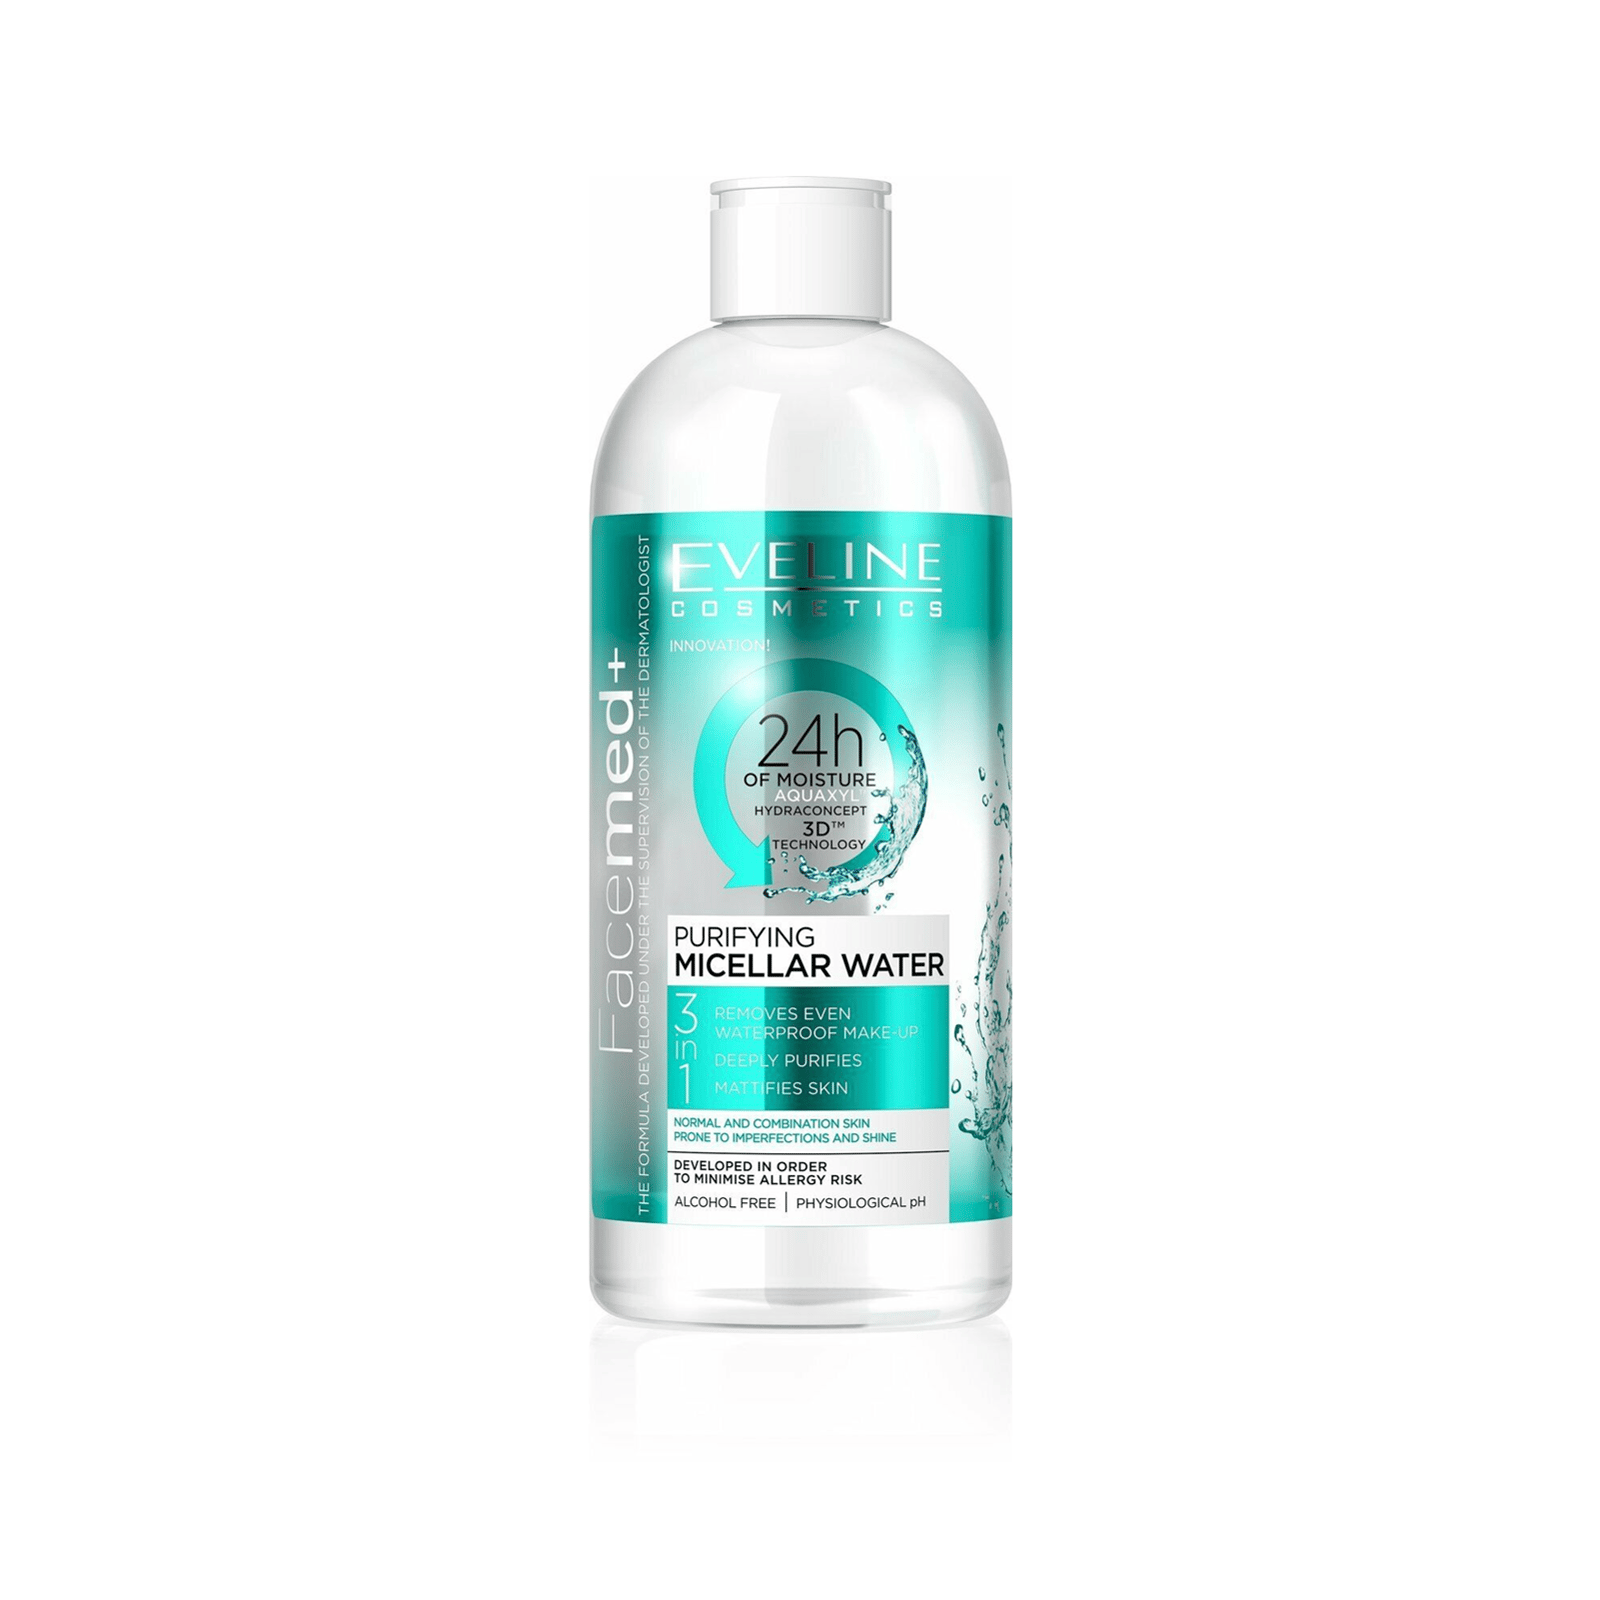 Eveline Cosmetics Facemed+ Purifying Micellar Water 400ml (14.08 fl oz)